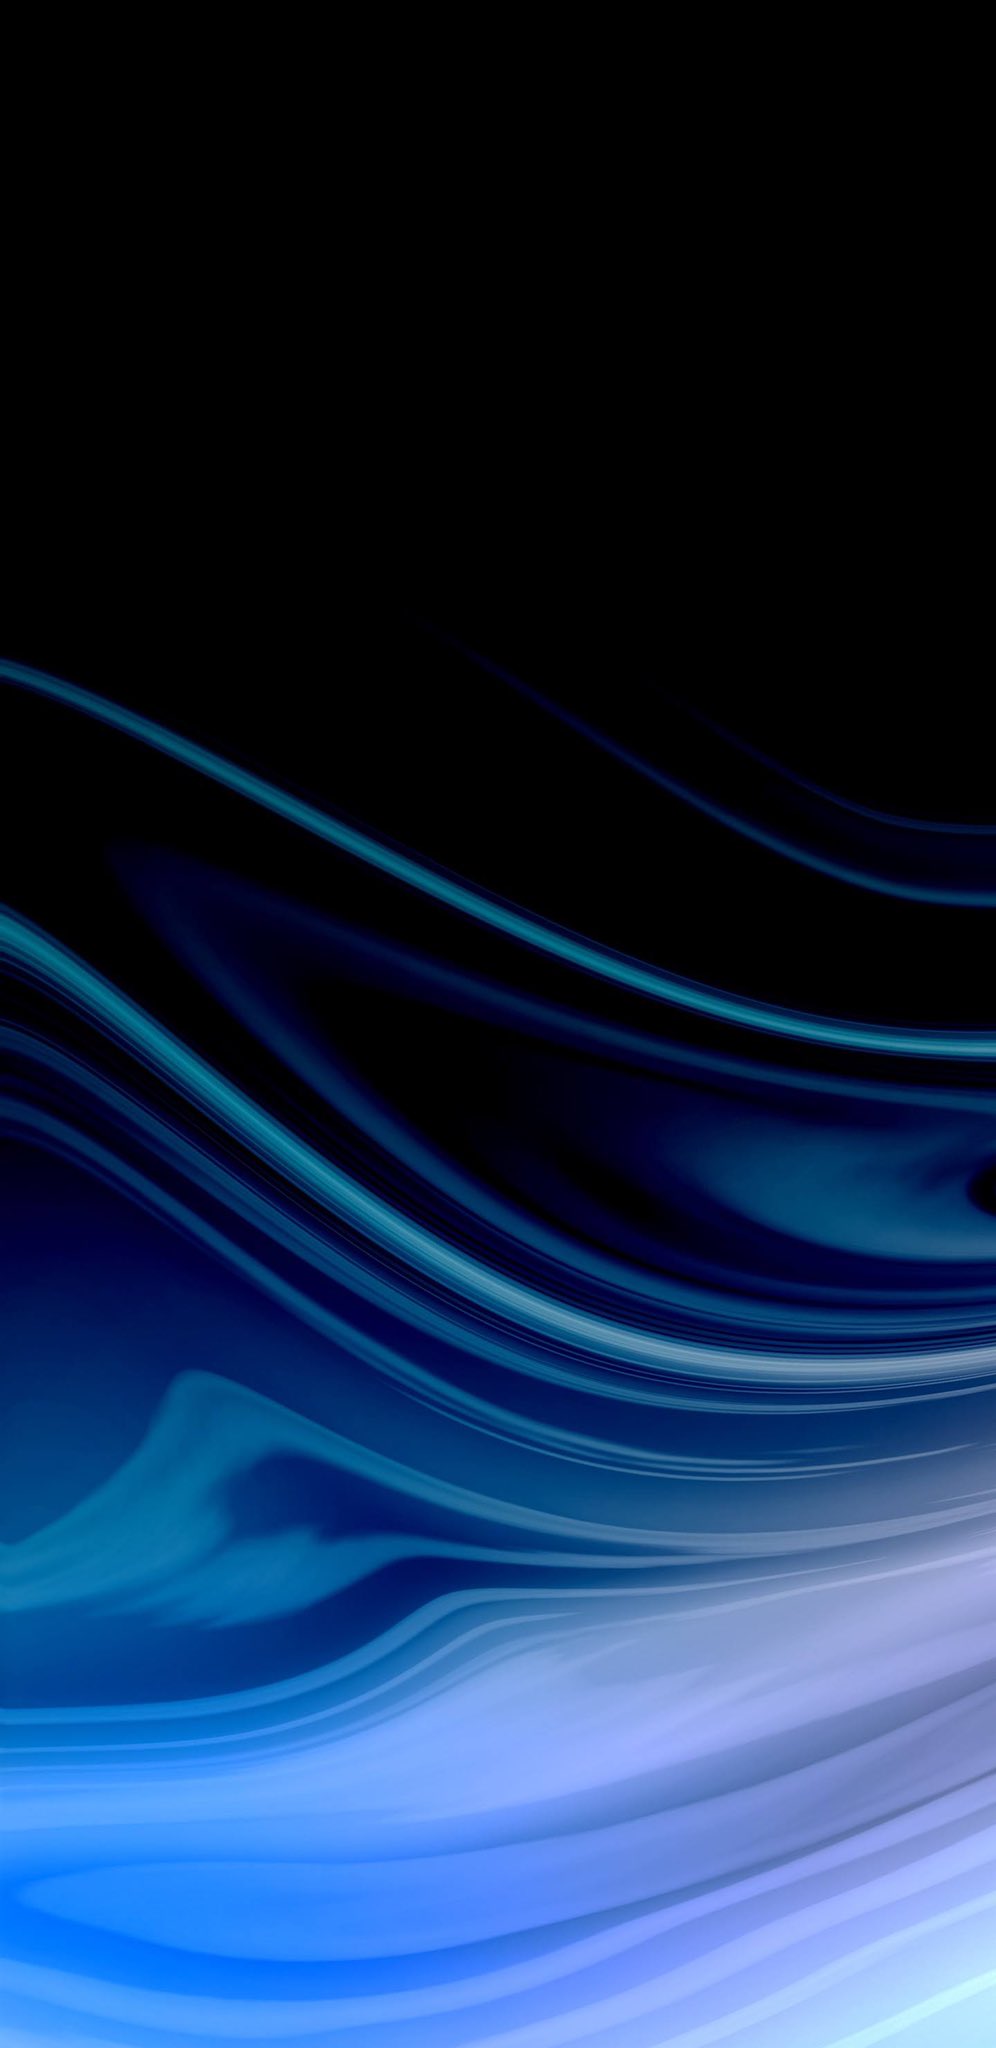 Pacific Blue iphone wallpaper idownloadblog smartechdaily abstract 2